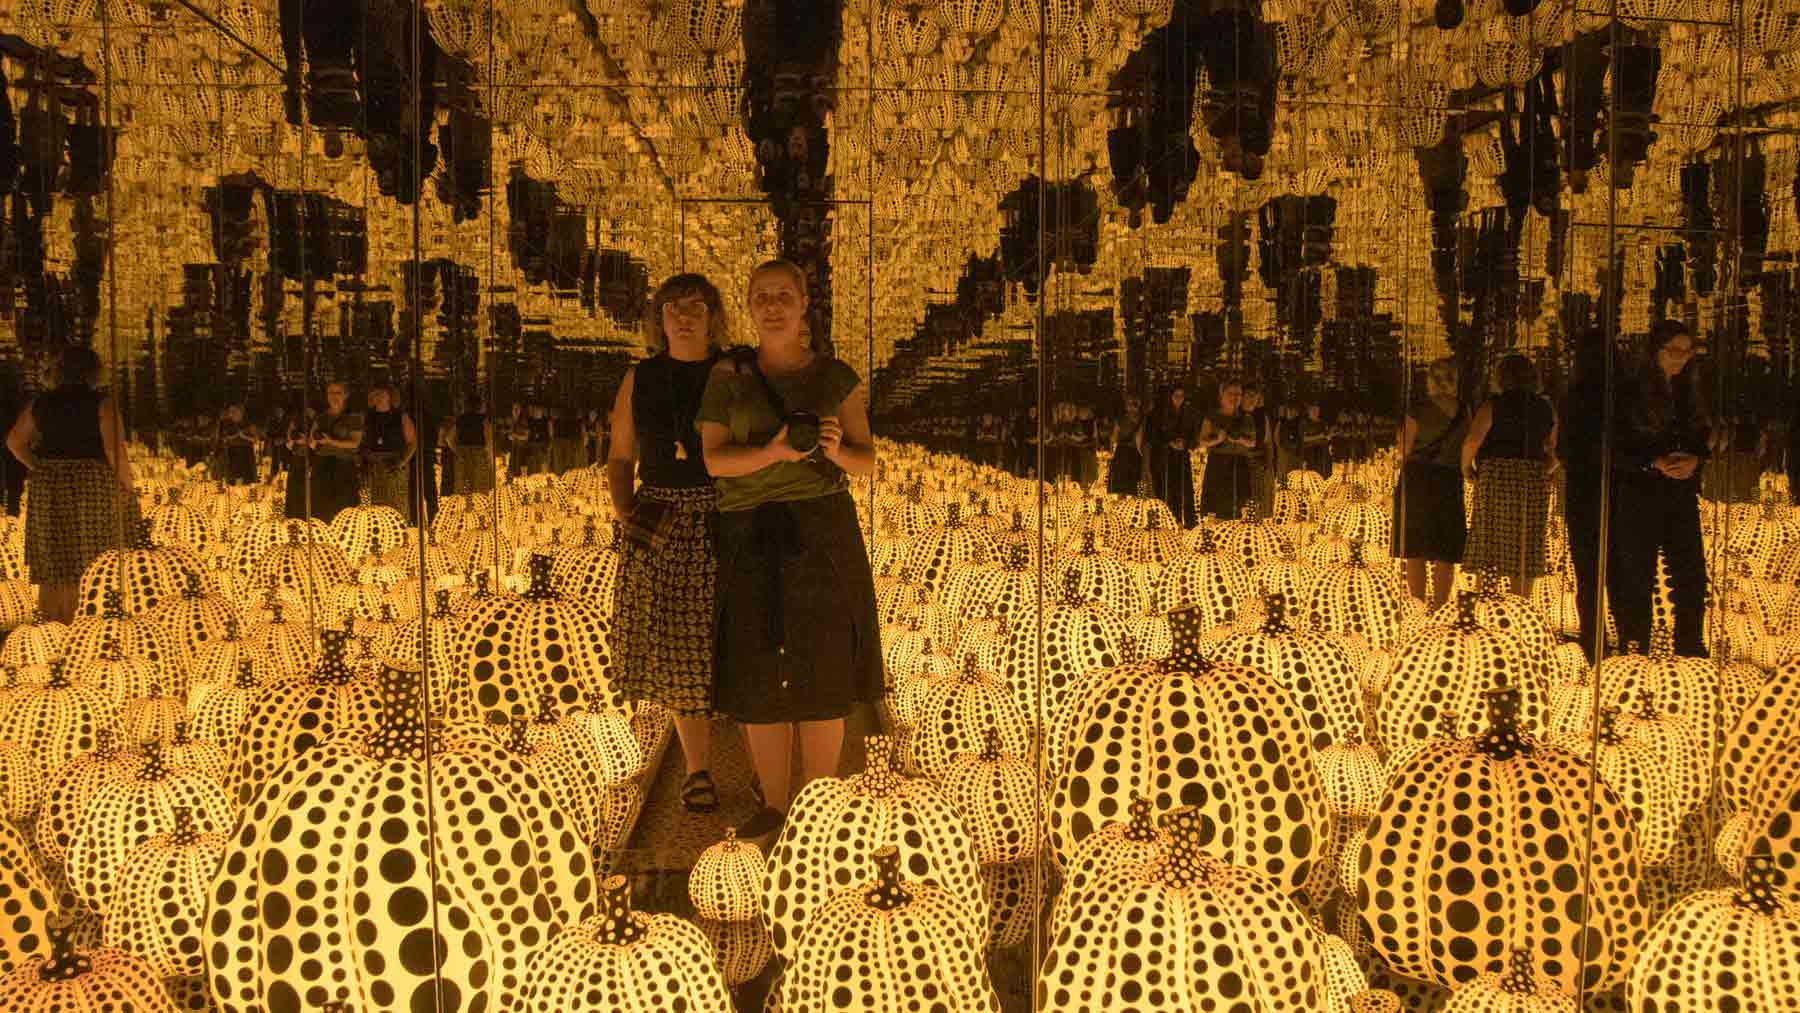 Clare and Fiona standing reflect in Yayoi Kusama's Infinity Room All the Eternal Love I Have for the Pumpkins (2016)